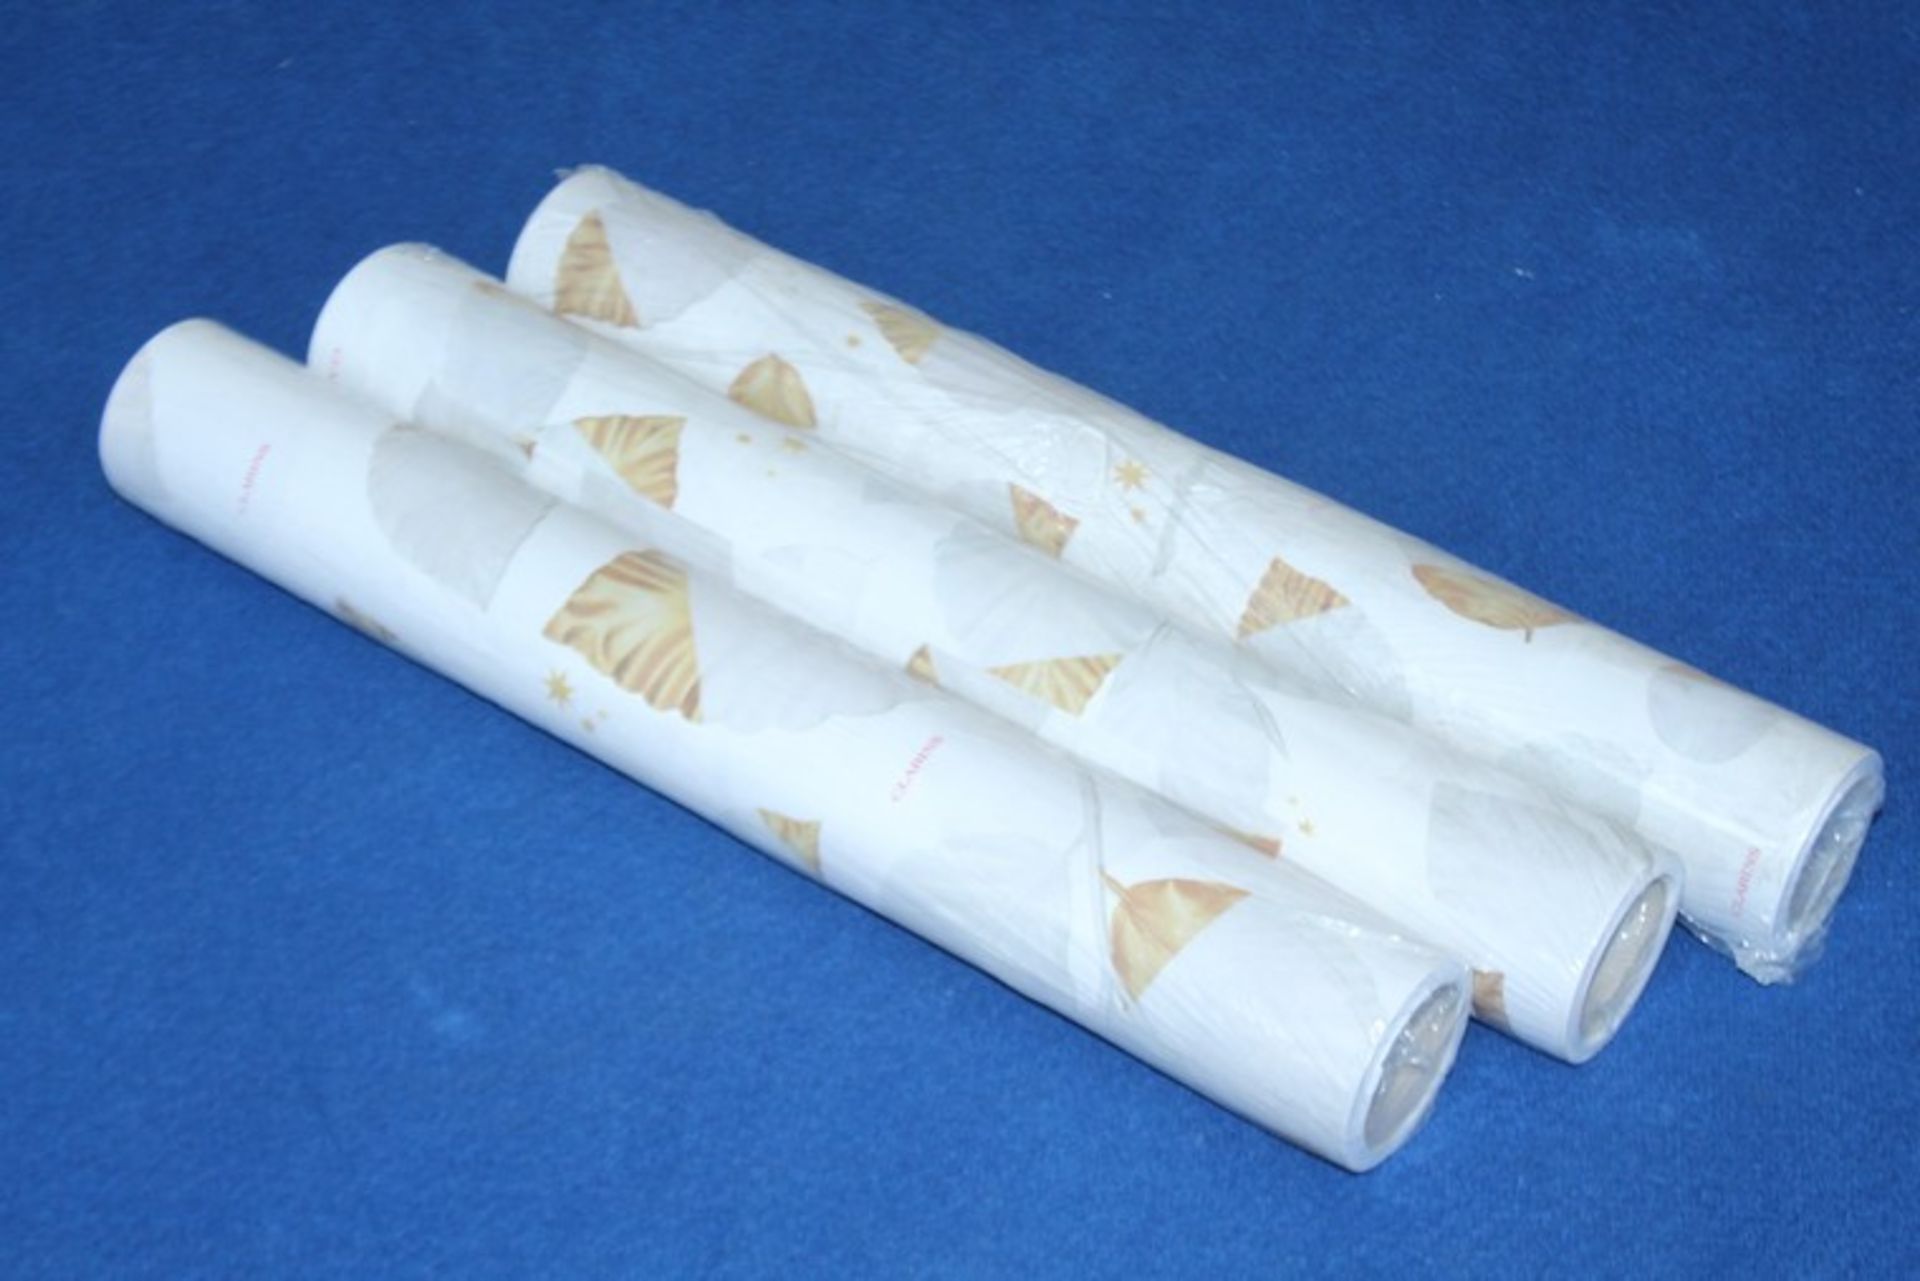 2 x ROLLS OF CLARINS WALLPAPER *PLEASE NOTE THAT THE BID PRICE IS MULTIPLIED BY THE NUMBER OF